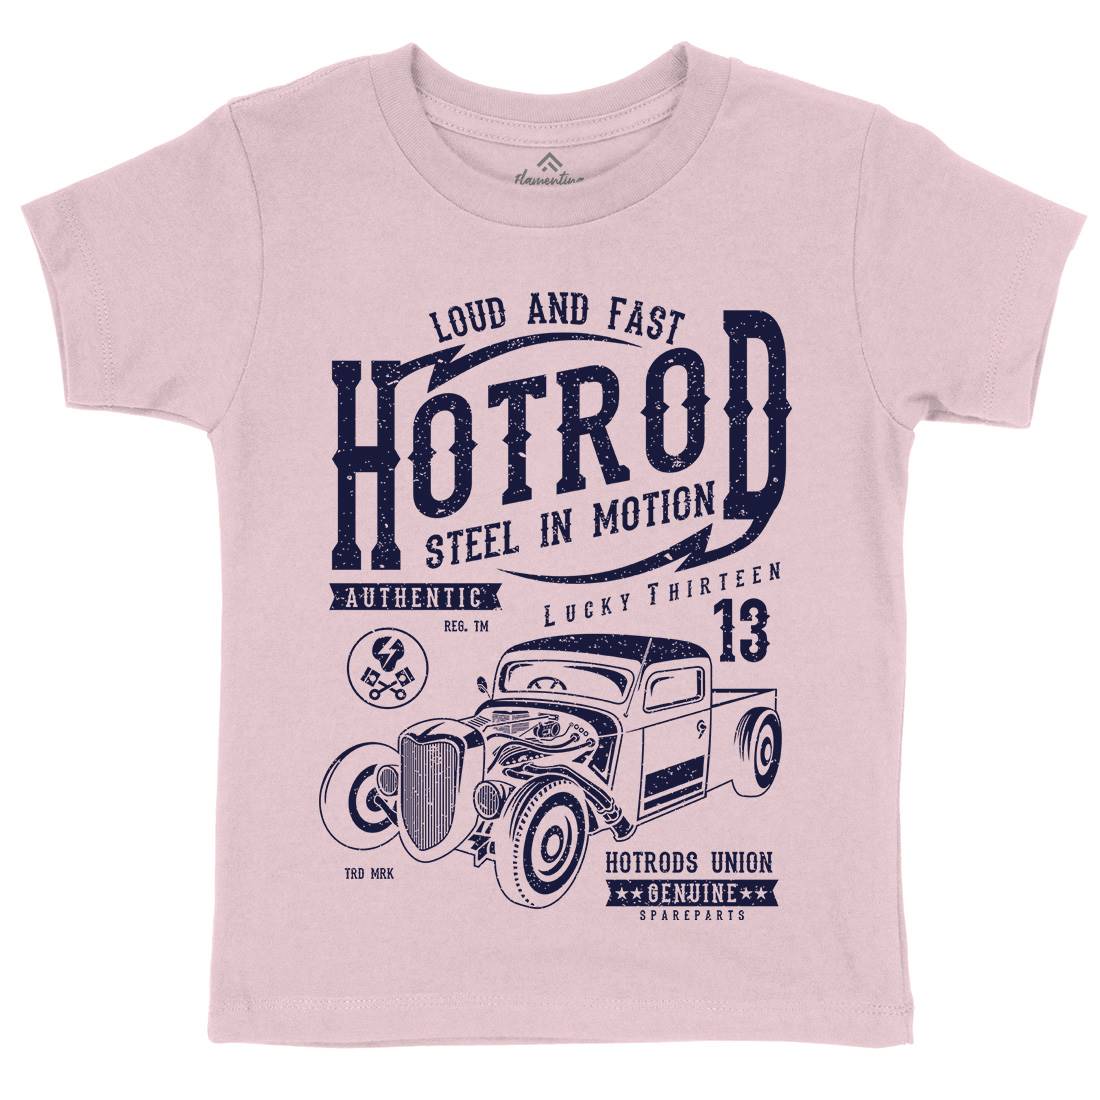 Steel In Motion Kids Crew Neck T-Shirt Cars A767